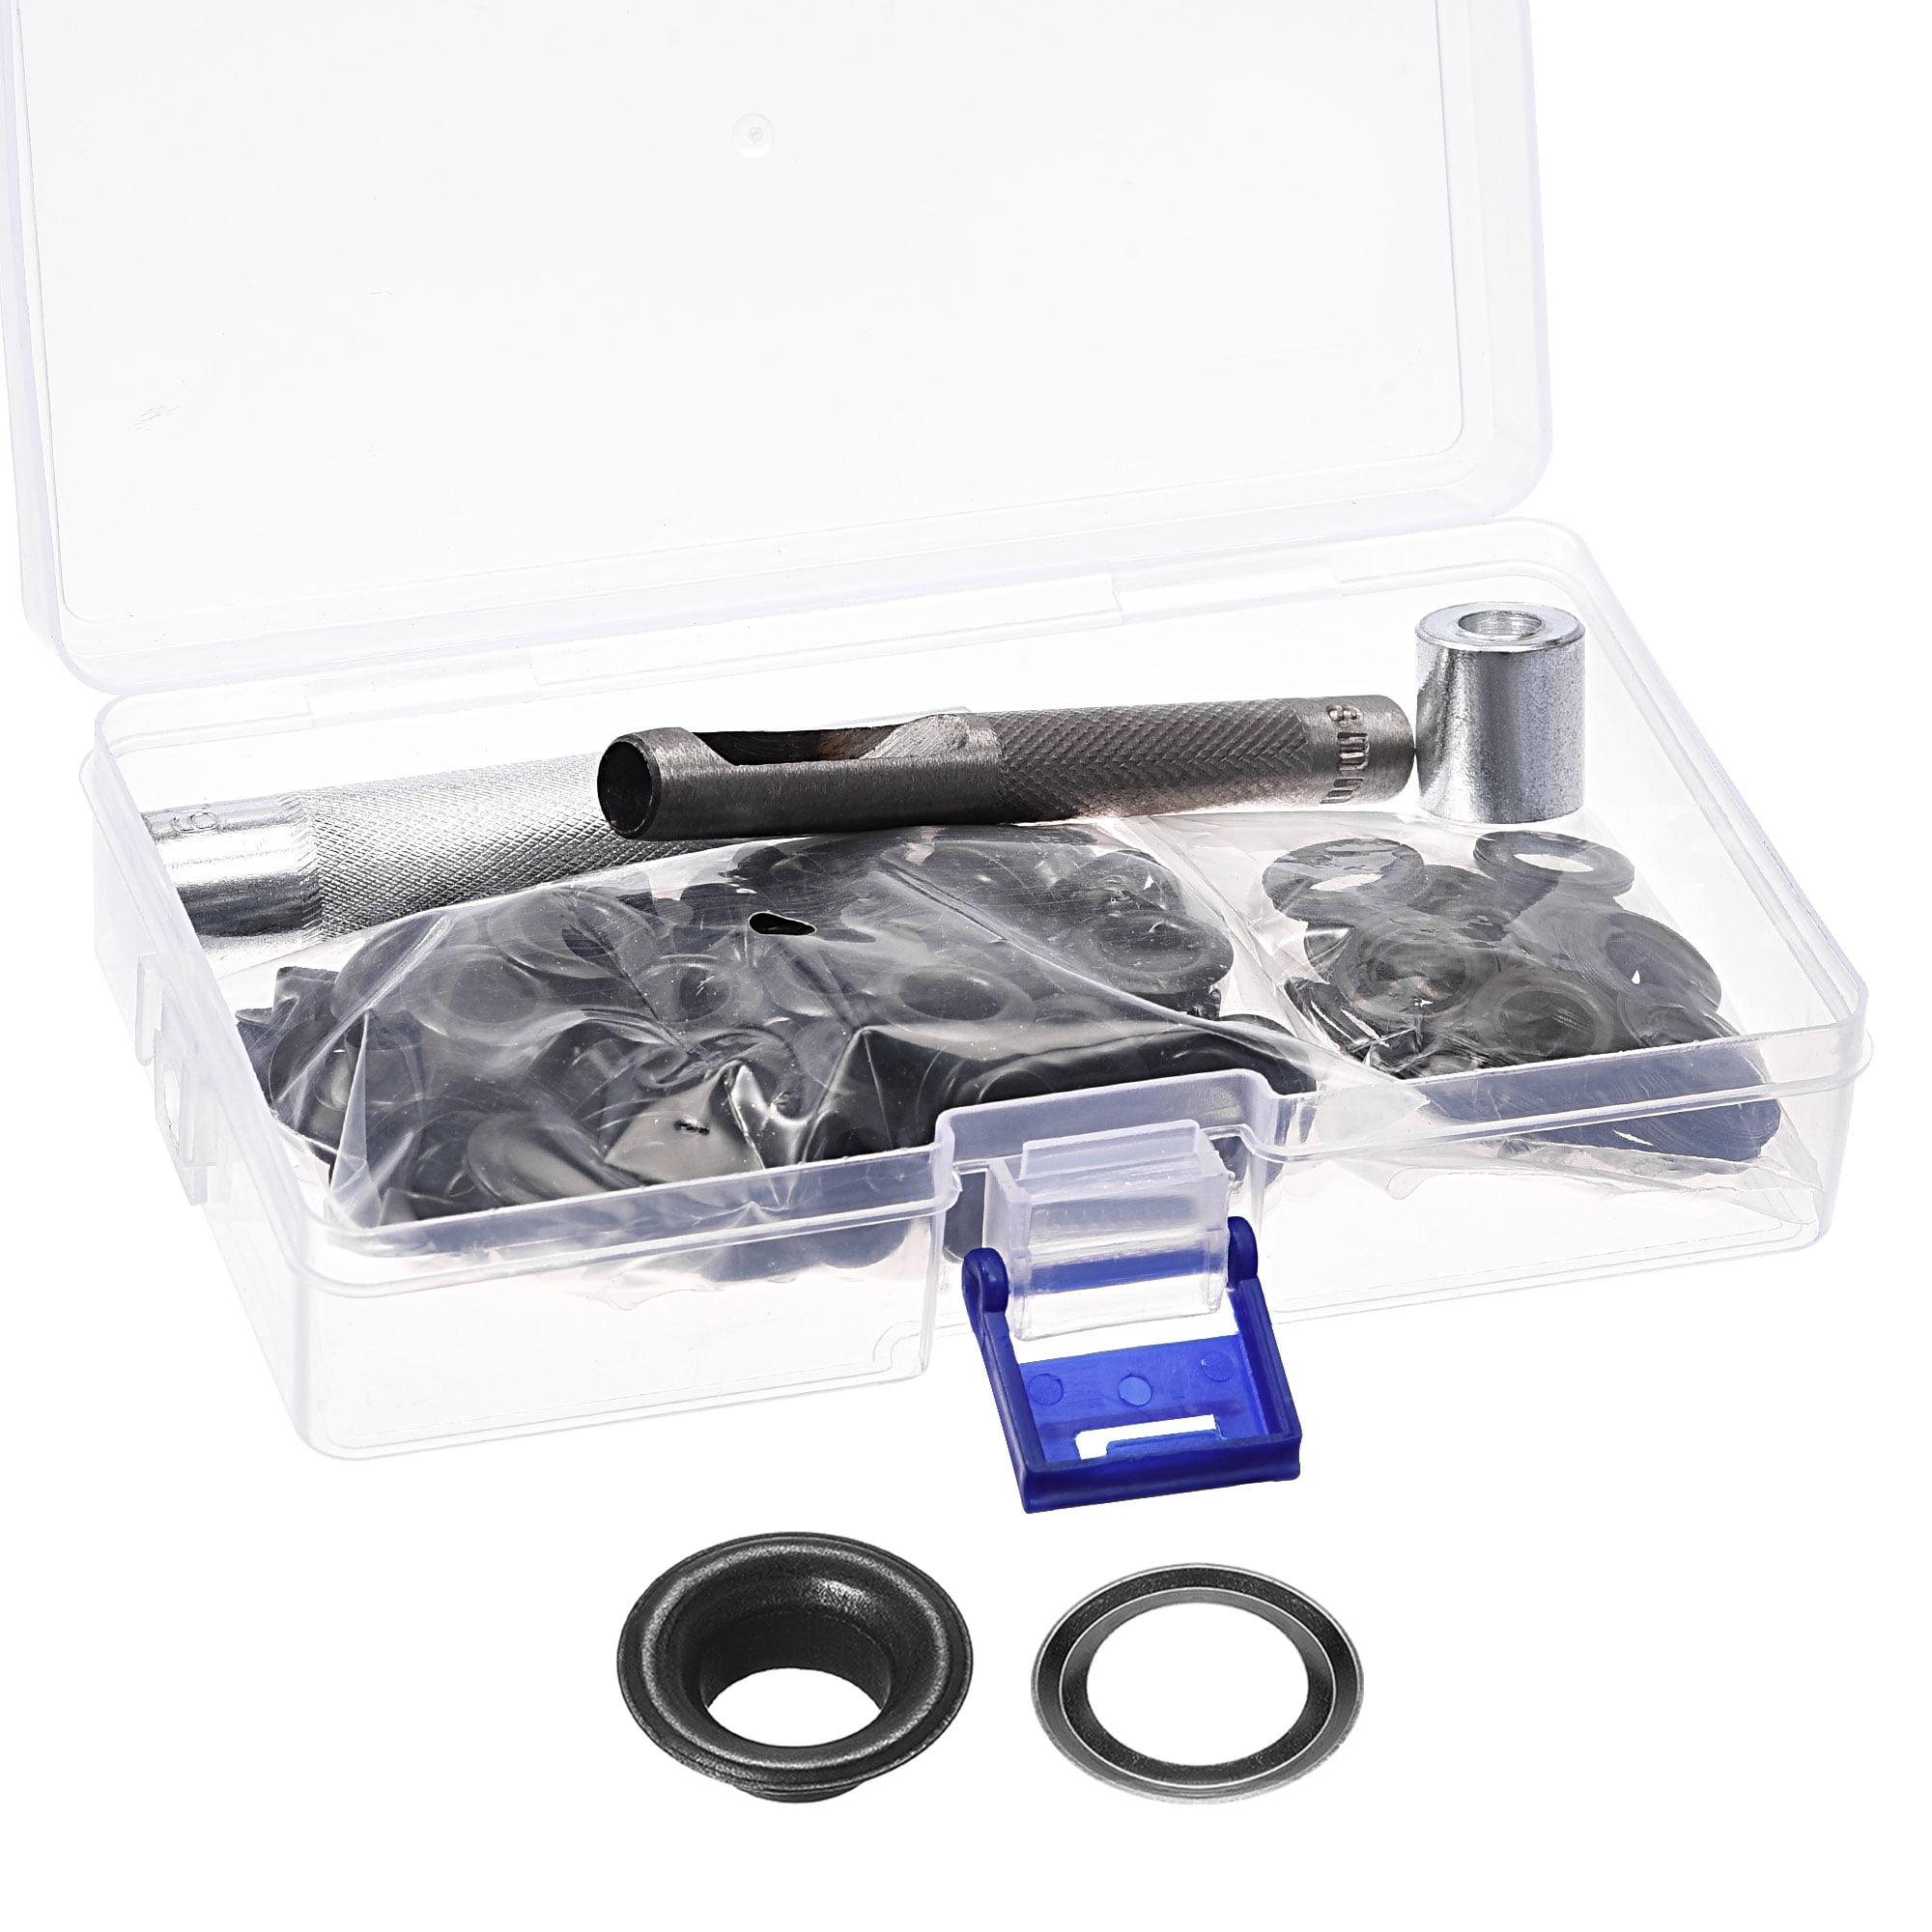 No. 1 Grommet Kit With Nickel Plated Grommets 